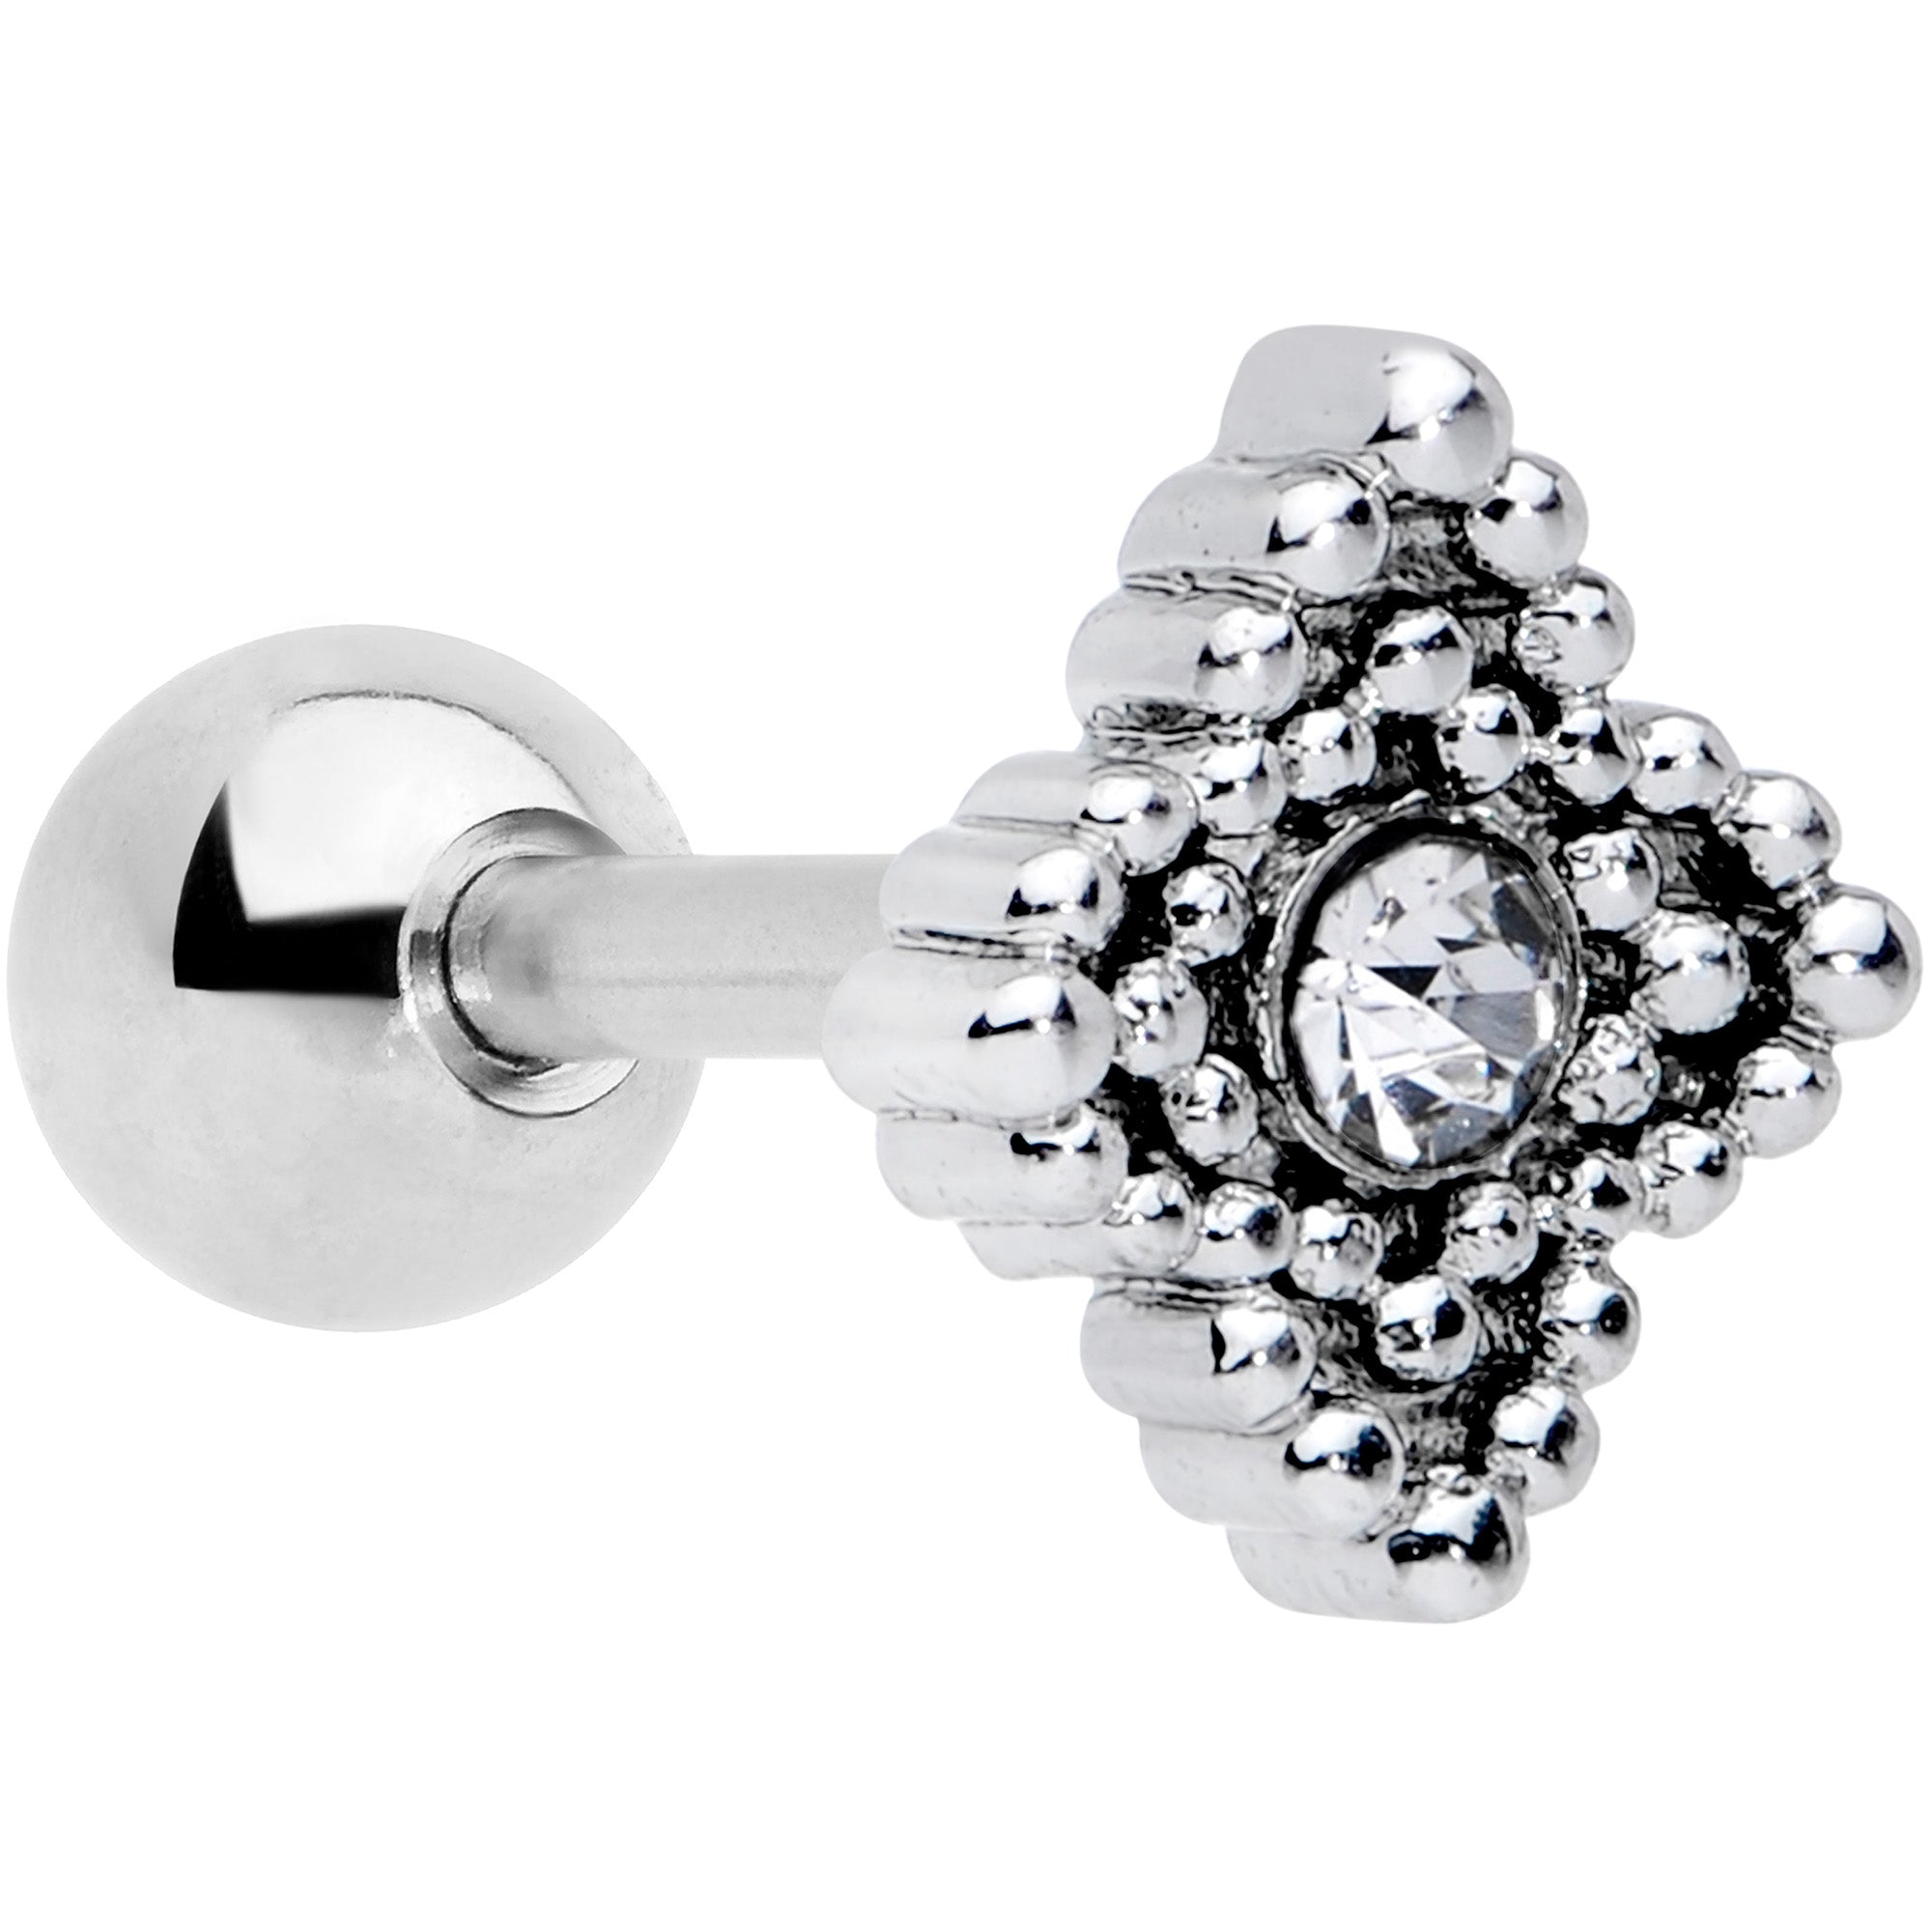 Silver Tone Aluminum Body Piercing Ball Removal Tool - Body Candy